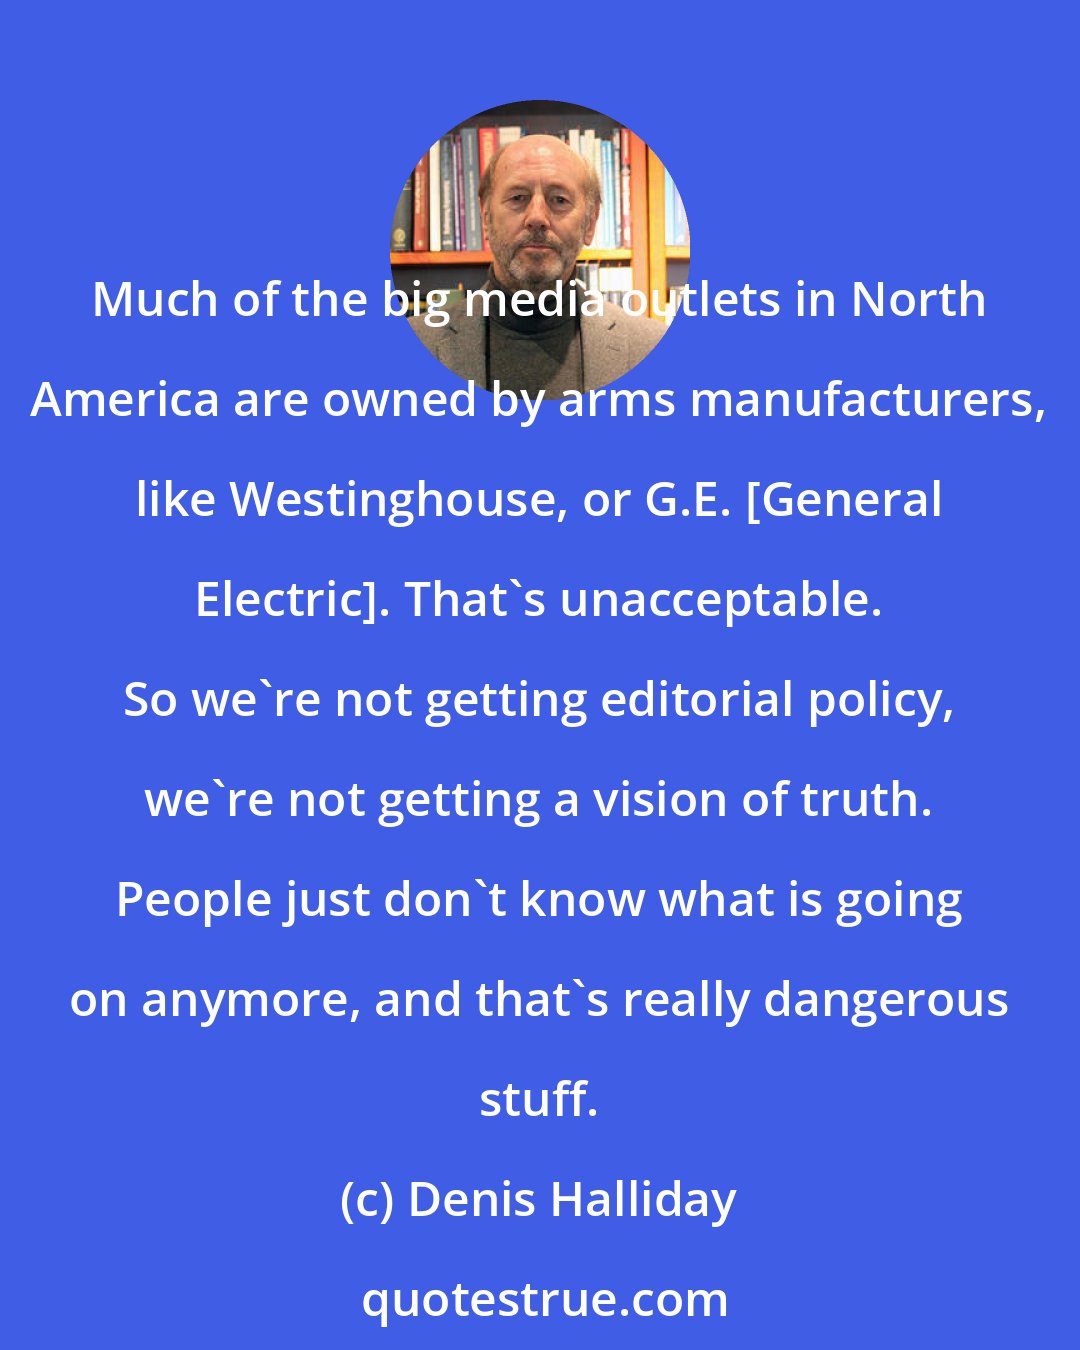 Denis Halliday: Much of the big media outlets in North America are owned by arms manufacturers, like Westinghouse, or G.E. [General Electric]. That's unacceptable. So we're not getting editorial policy, we're not getting a vision of truth. People just don't know what is going on anymore, and that's really dangerous stuff.